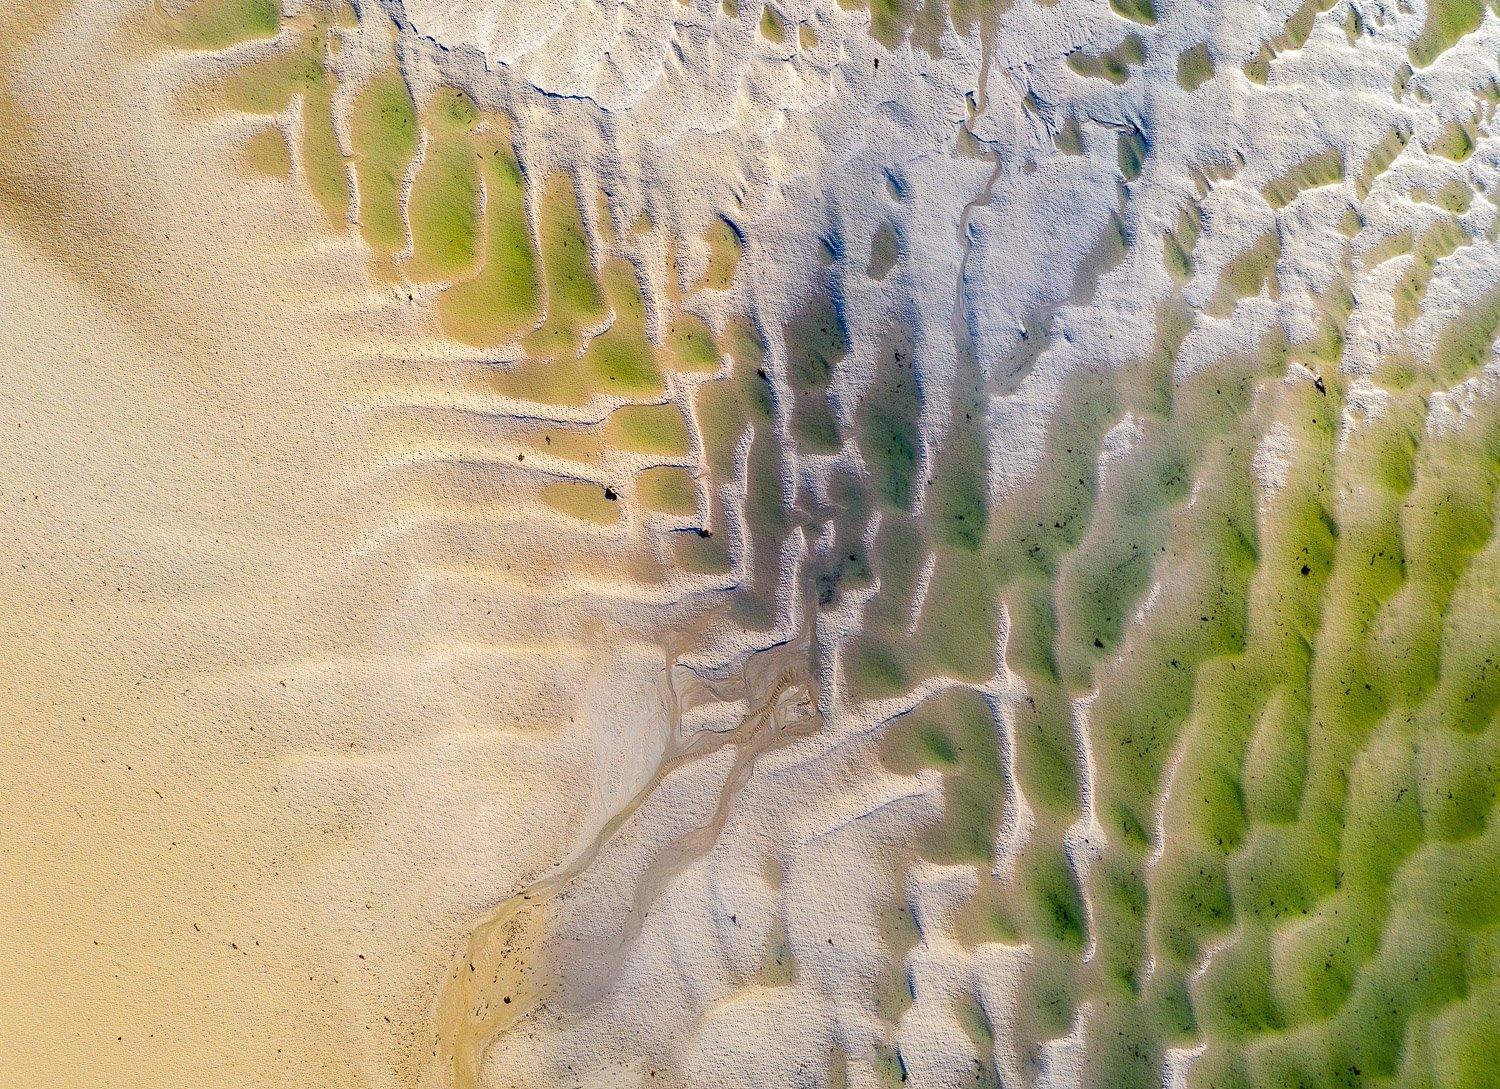 Froggy green and grey colored shades on a sand-colored surface having symmetrical shapes of cracks and waves, Lime Coast